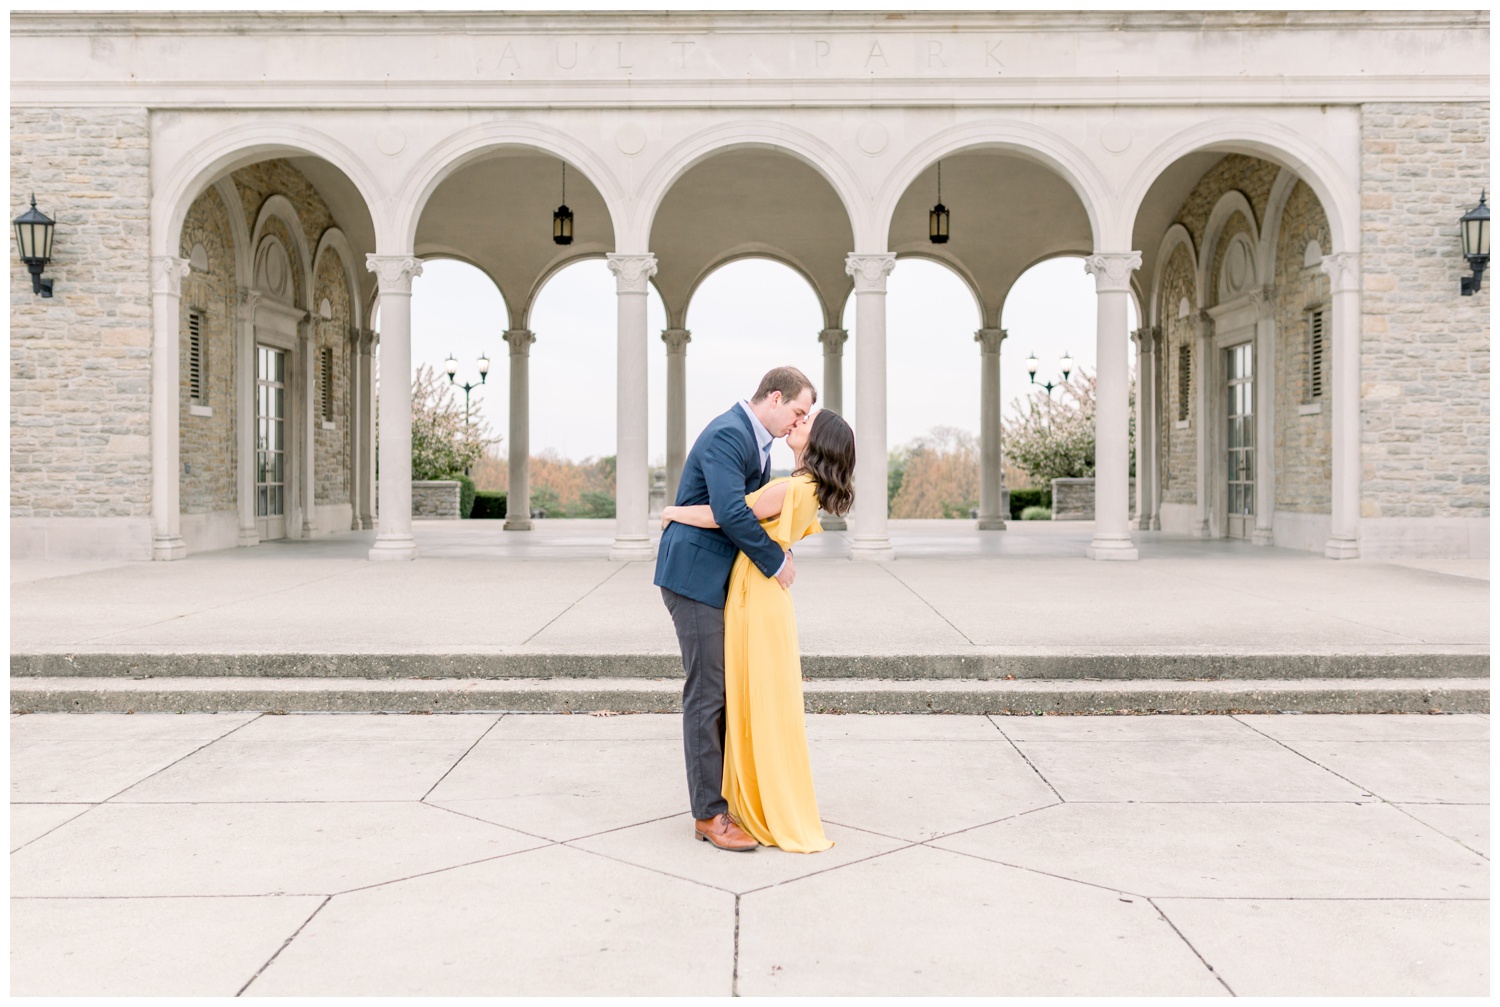 Ault Park Engagement Session - What to Wear for Engagement Pictures